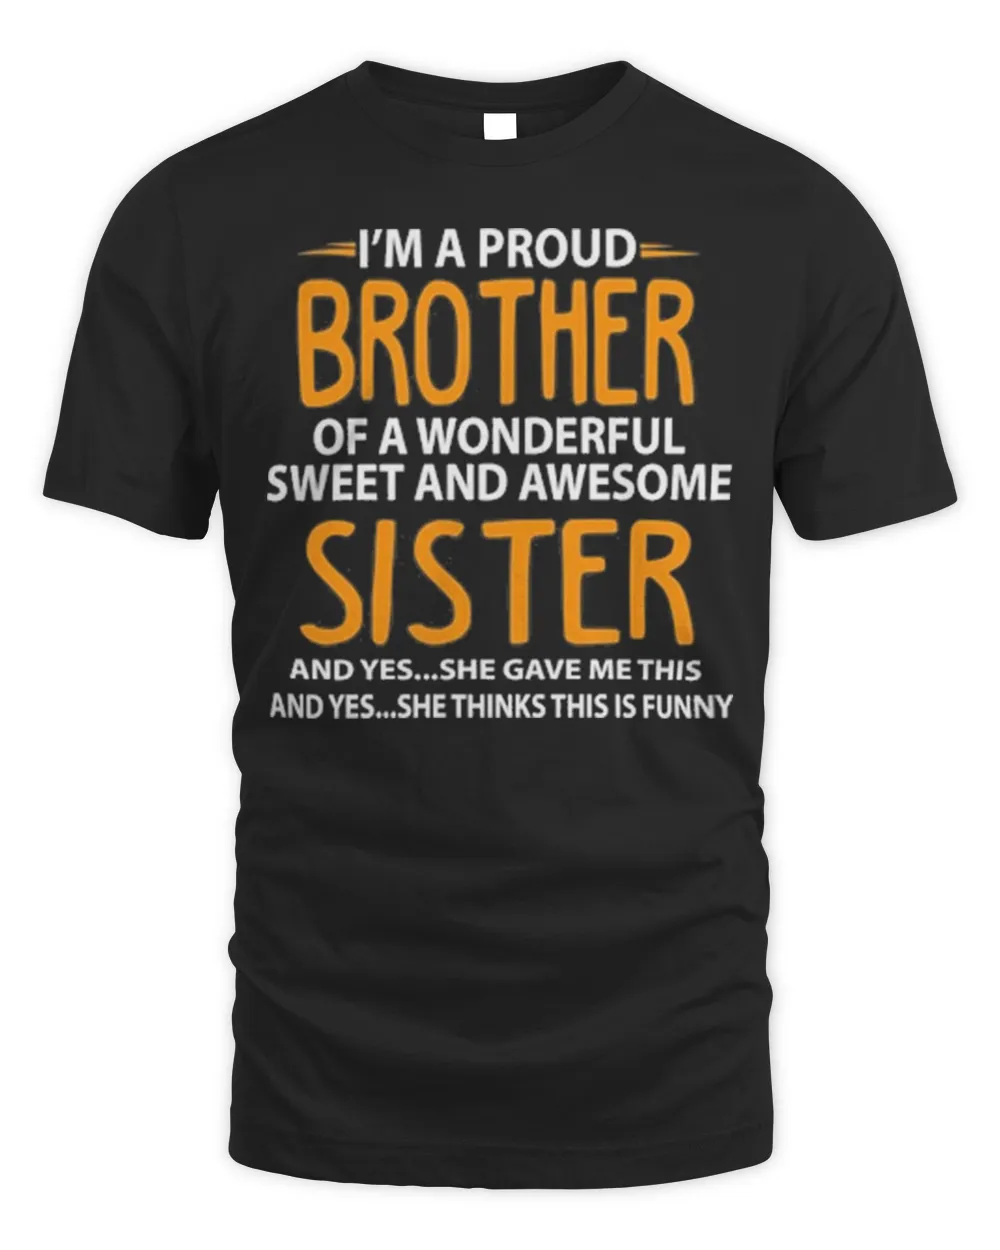 I'm A Proud Brother Of A Wonderful Sweet And Awesome Sister Shirt